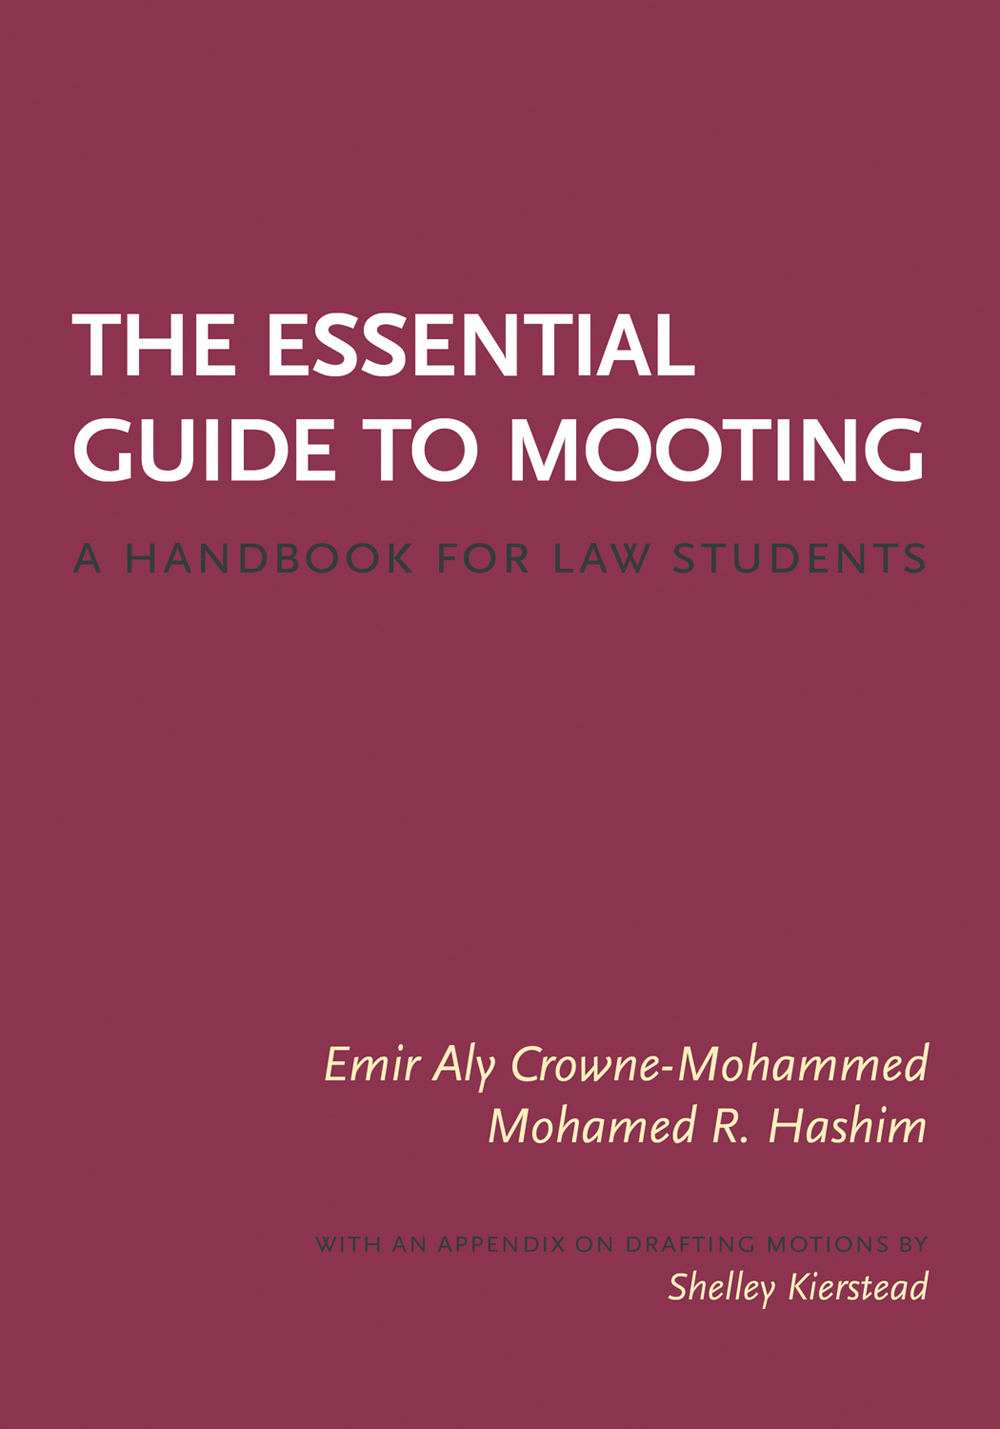 The Essential Guide to Mooting